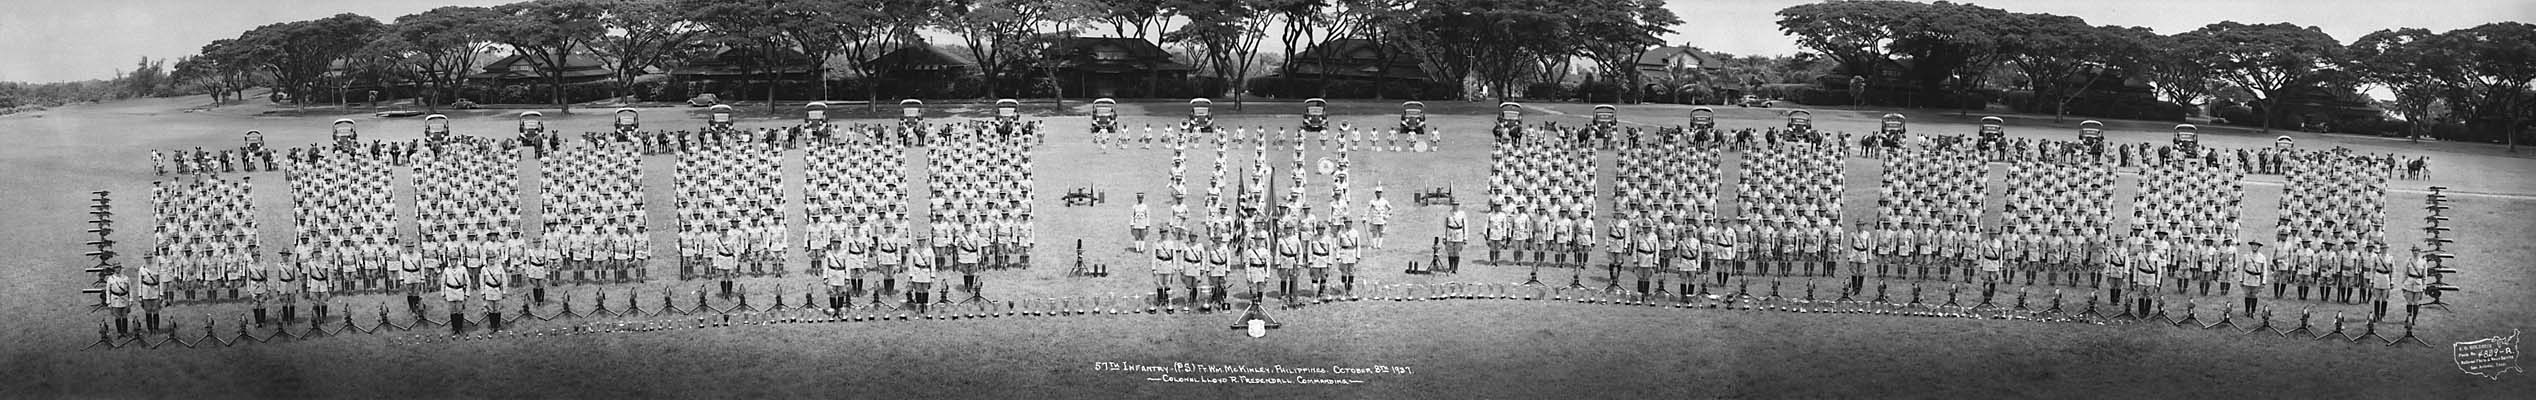 57th Infantry (Philippine Scouts). Fort William McKinley; Rizal, Philippines. October 8, 1937.